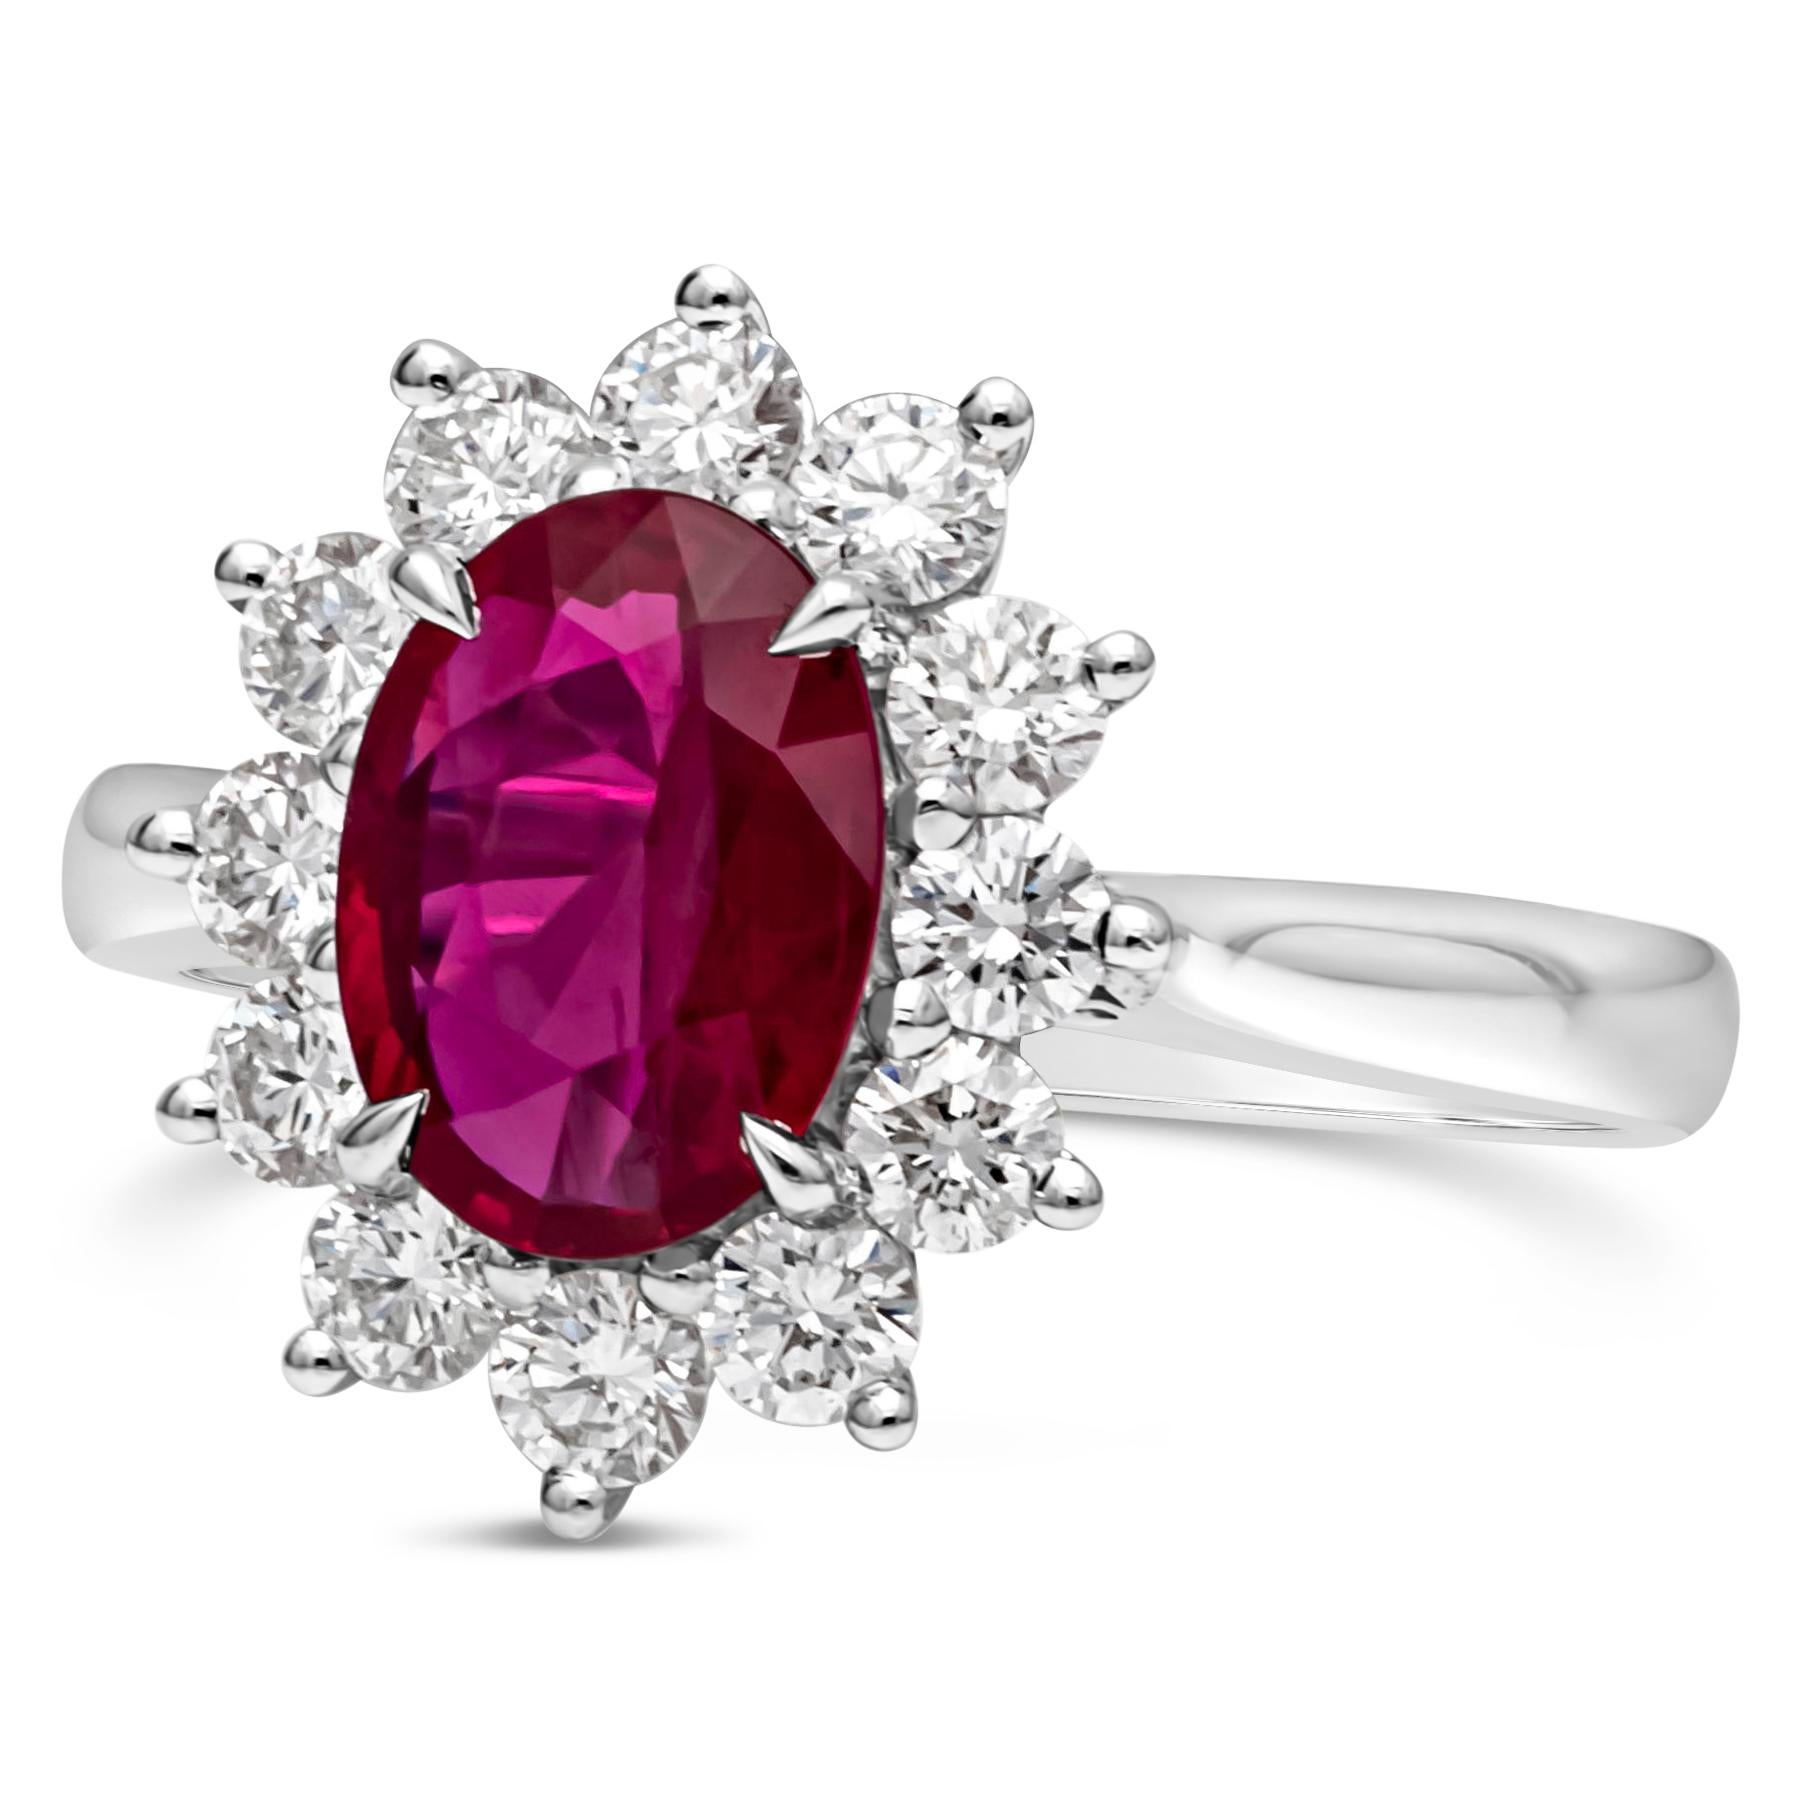 A gorgeous and vibrant engagement ring, featuring 1.50 carats of oval cut ruby. Accented with a halo of 12 round shape sparkling diamonds weighing 0.75 carat total, set in a floral design. Made in 18K white gold composition with a comfort fit shank.